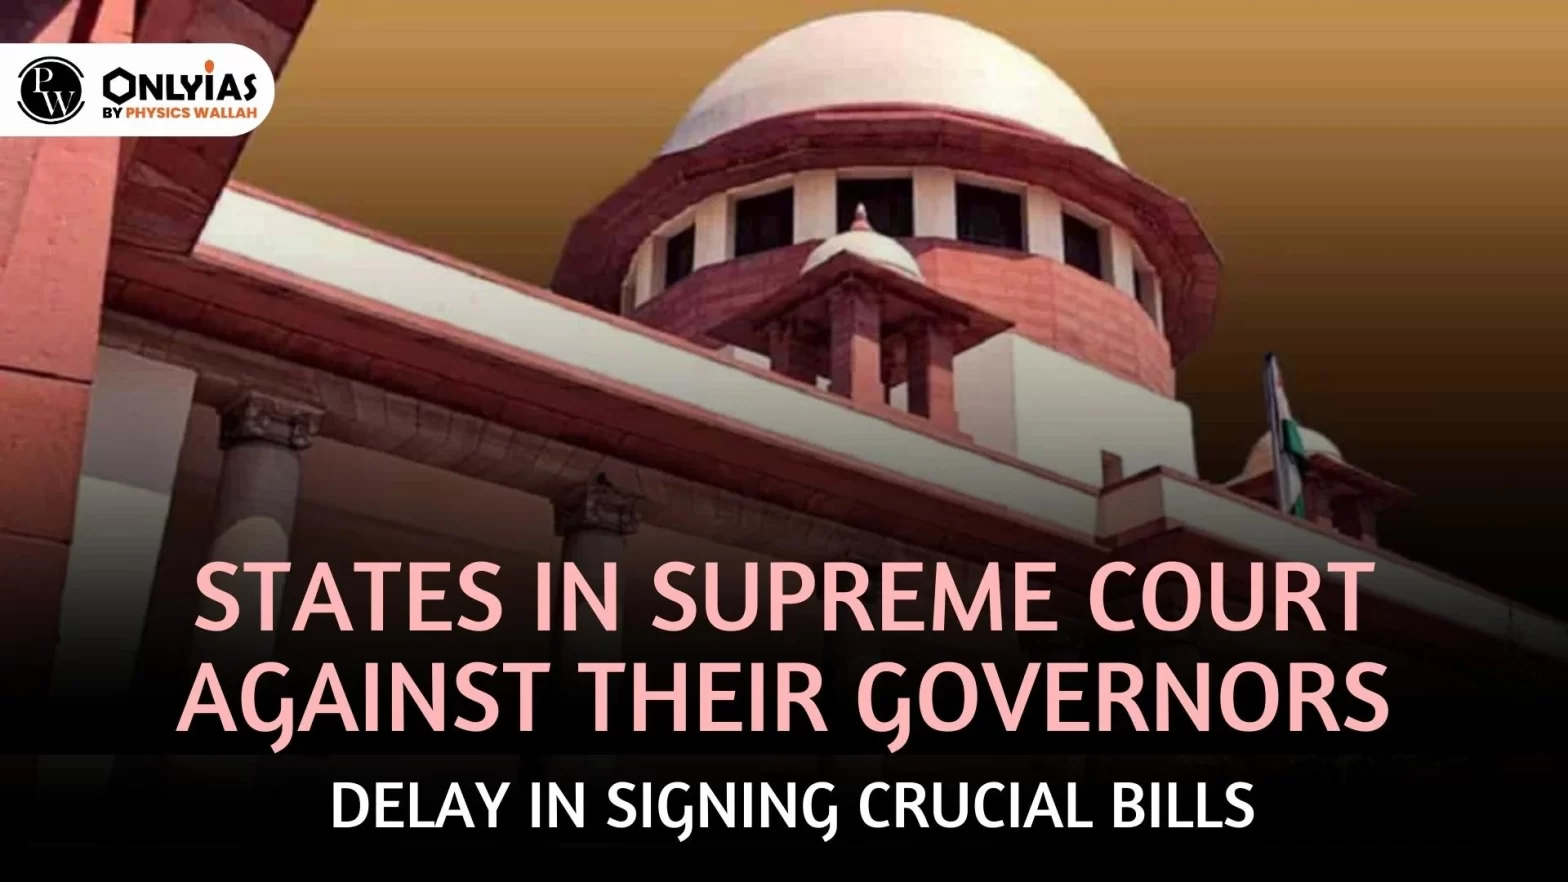 States in Supreme Court against their Governors – Delay in Signing Crucial Bills